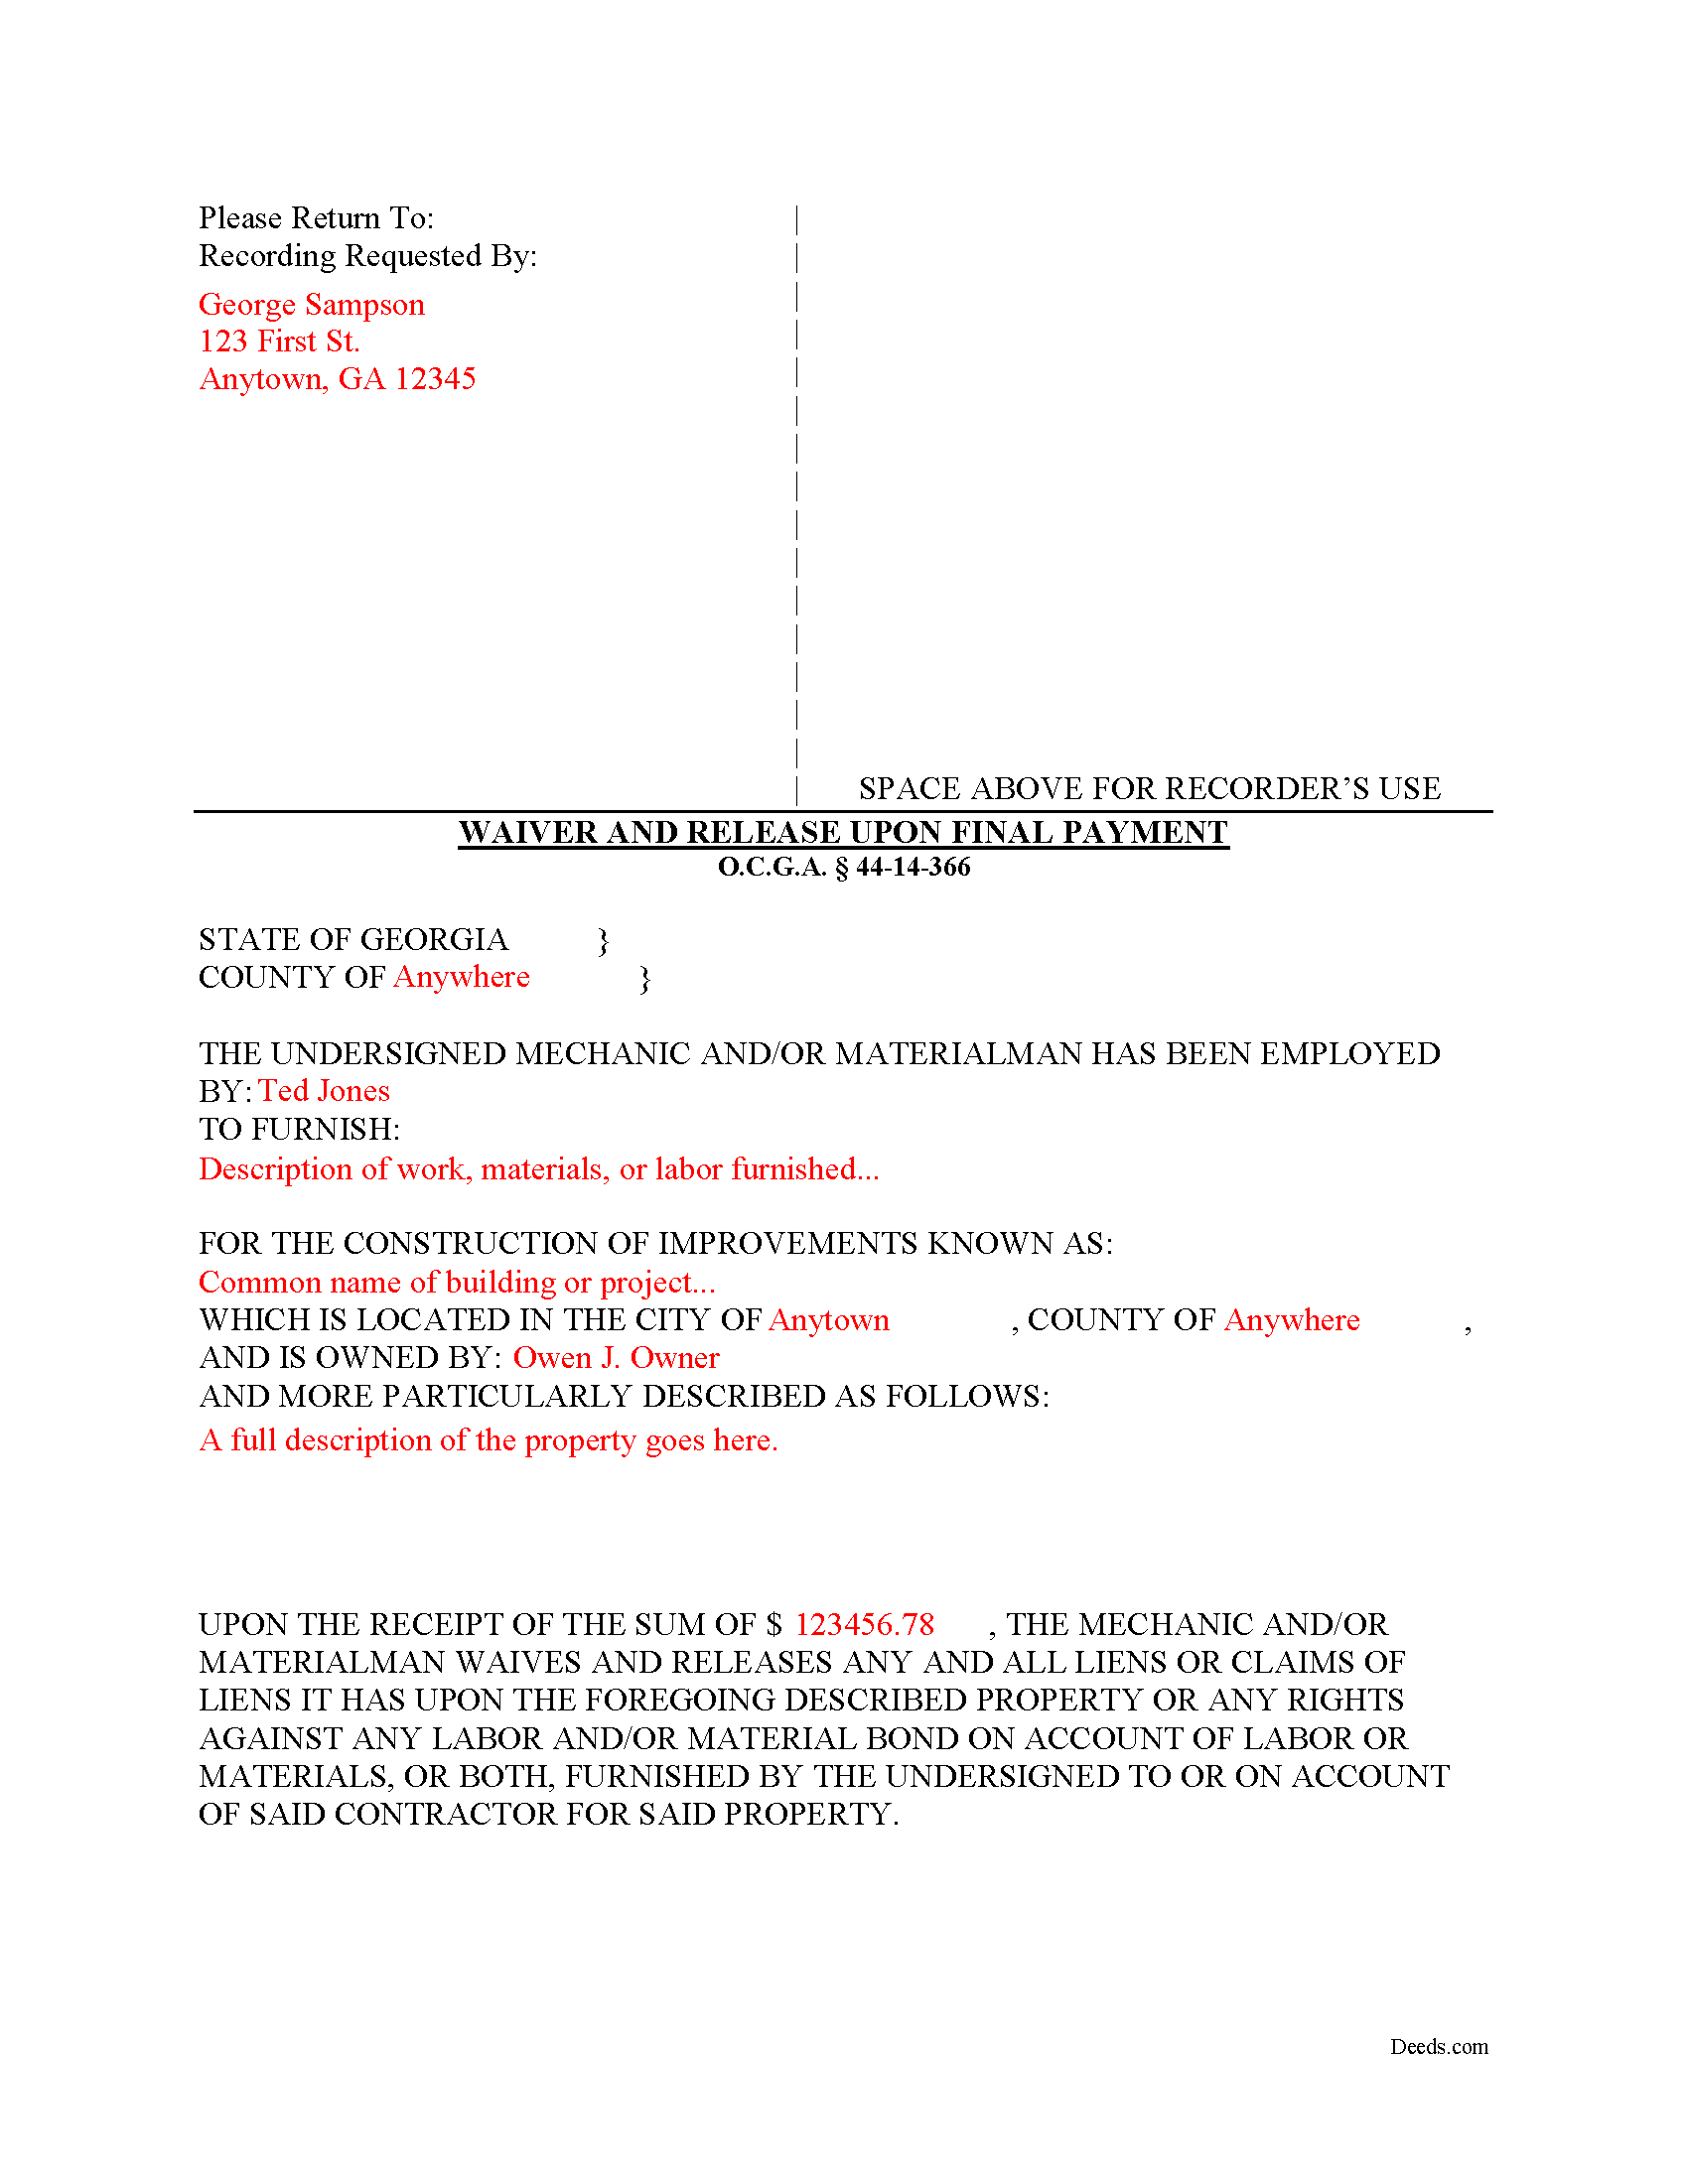 Completed Example of the Final Lien Waiver and Release Document